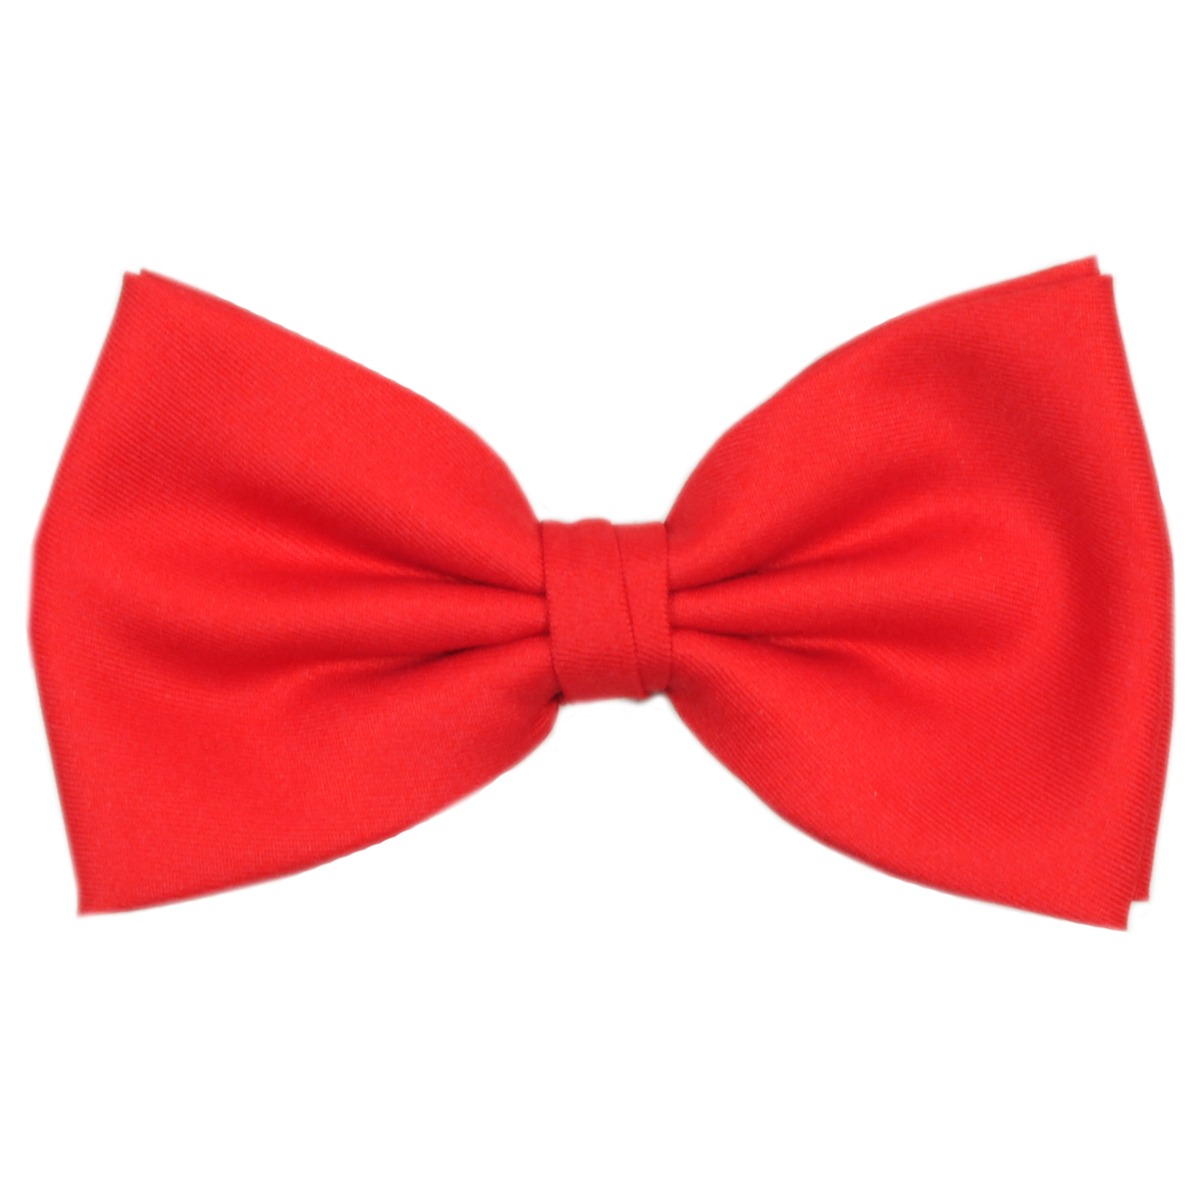 Red bow tie clipart